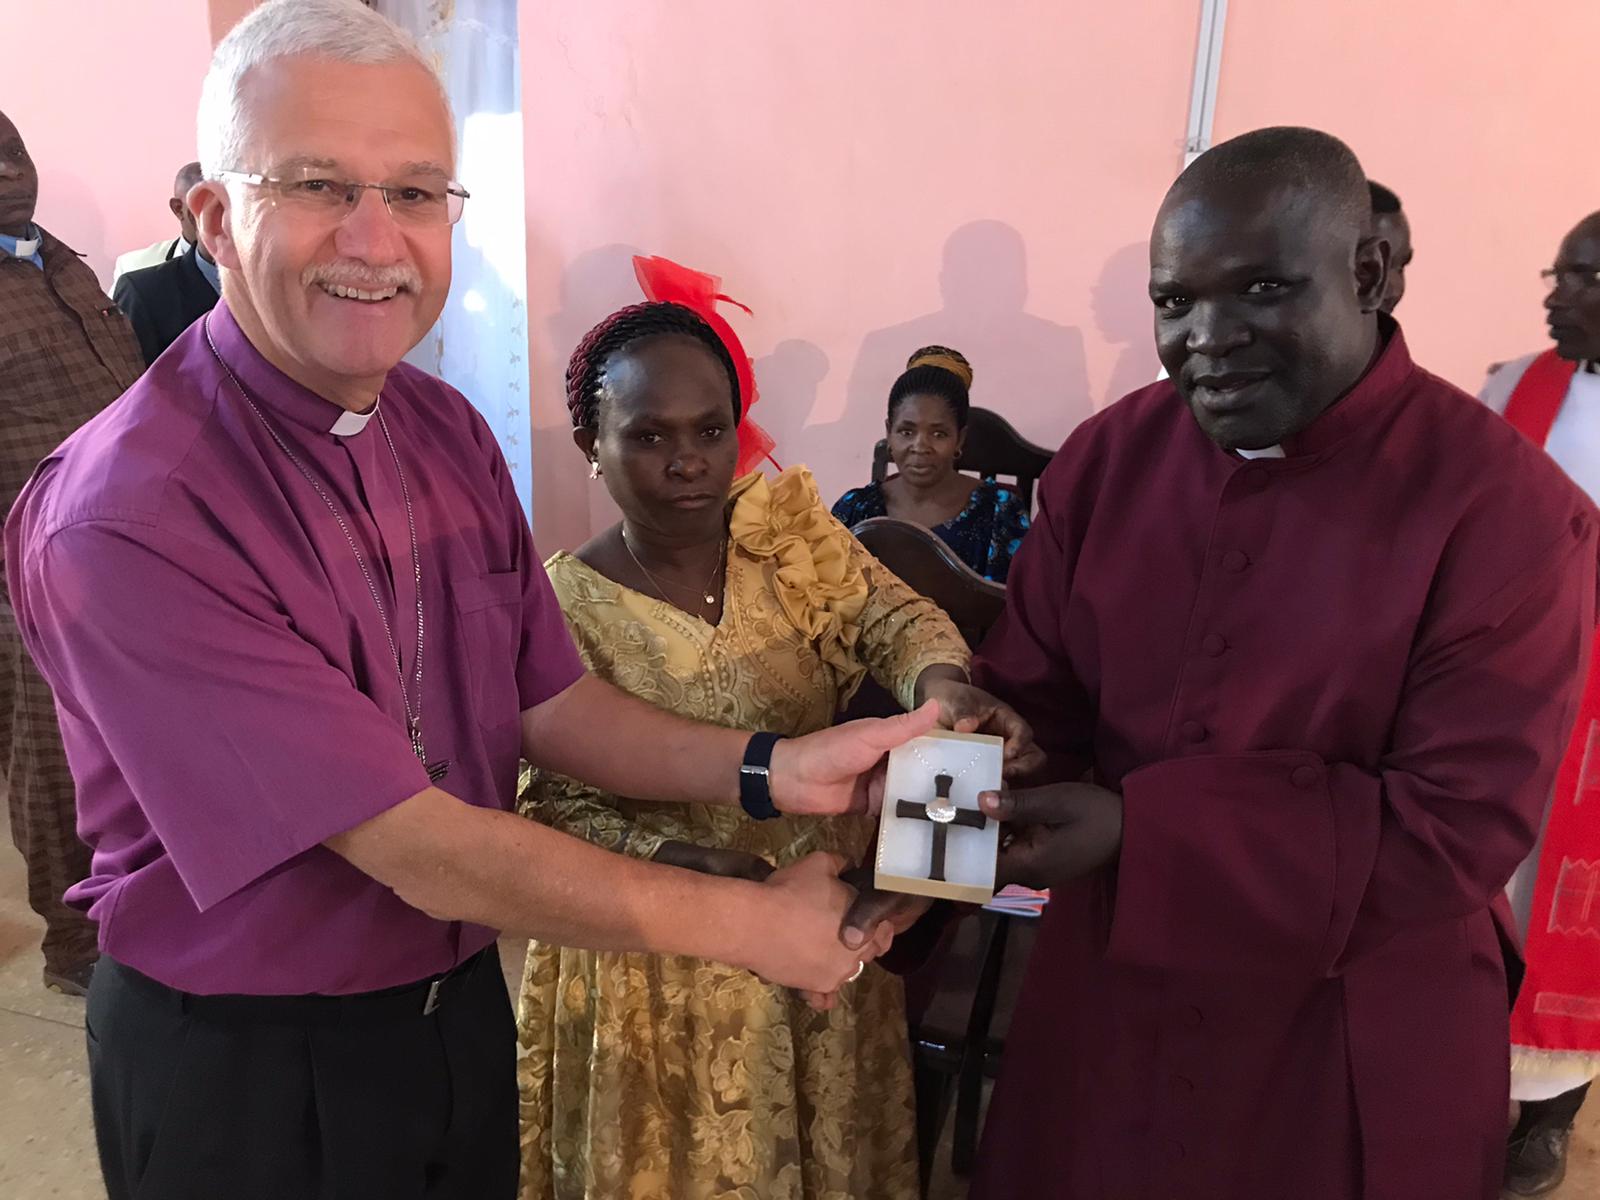 Bishop Jonathan presents the new Bishop of Mpwapwa and his wife with the gift of a cross provided by Rochester Diocese